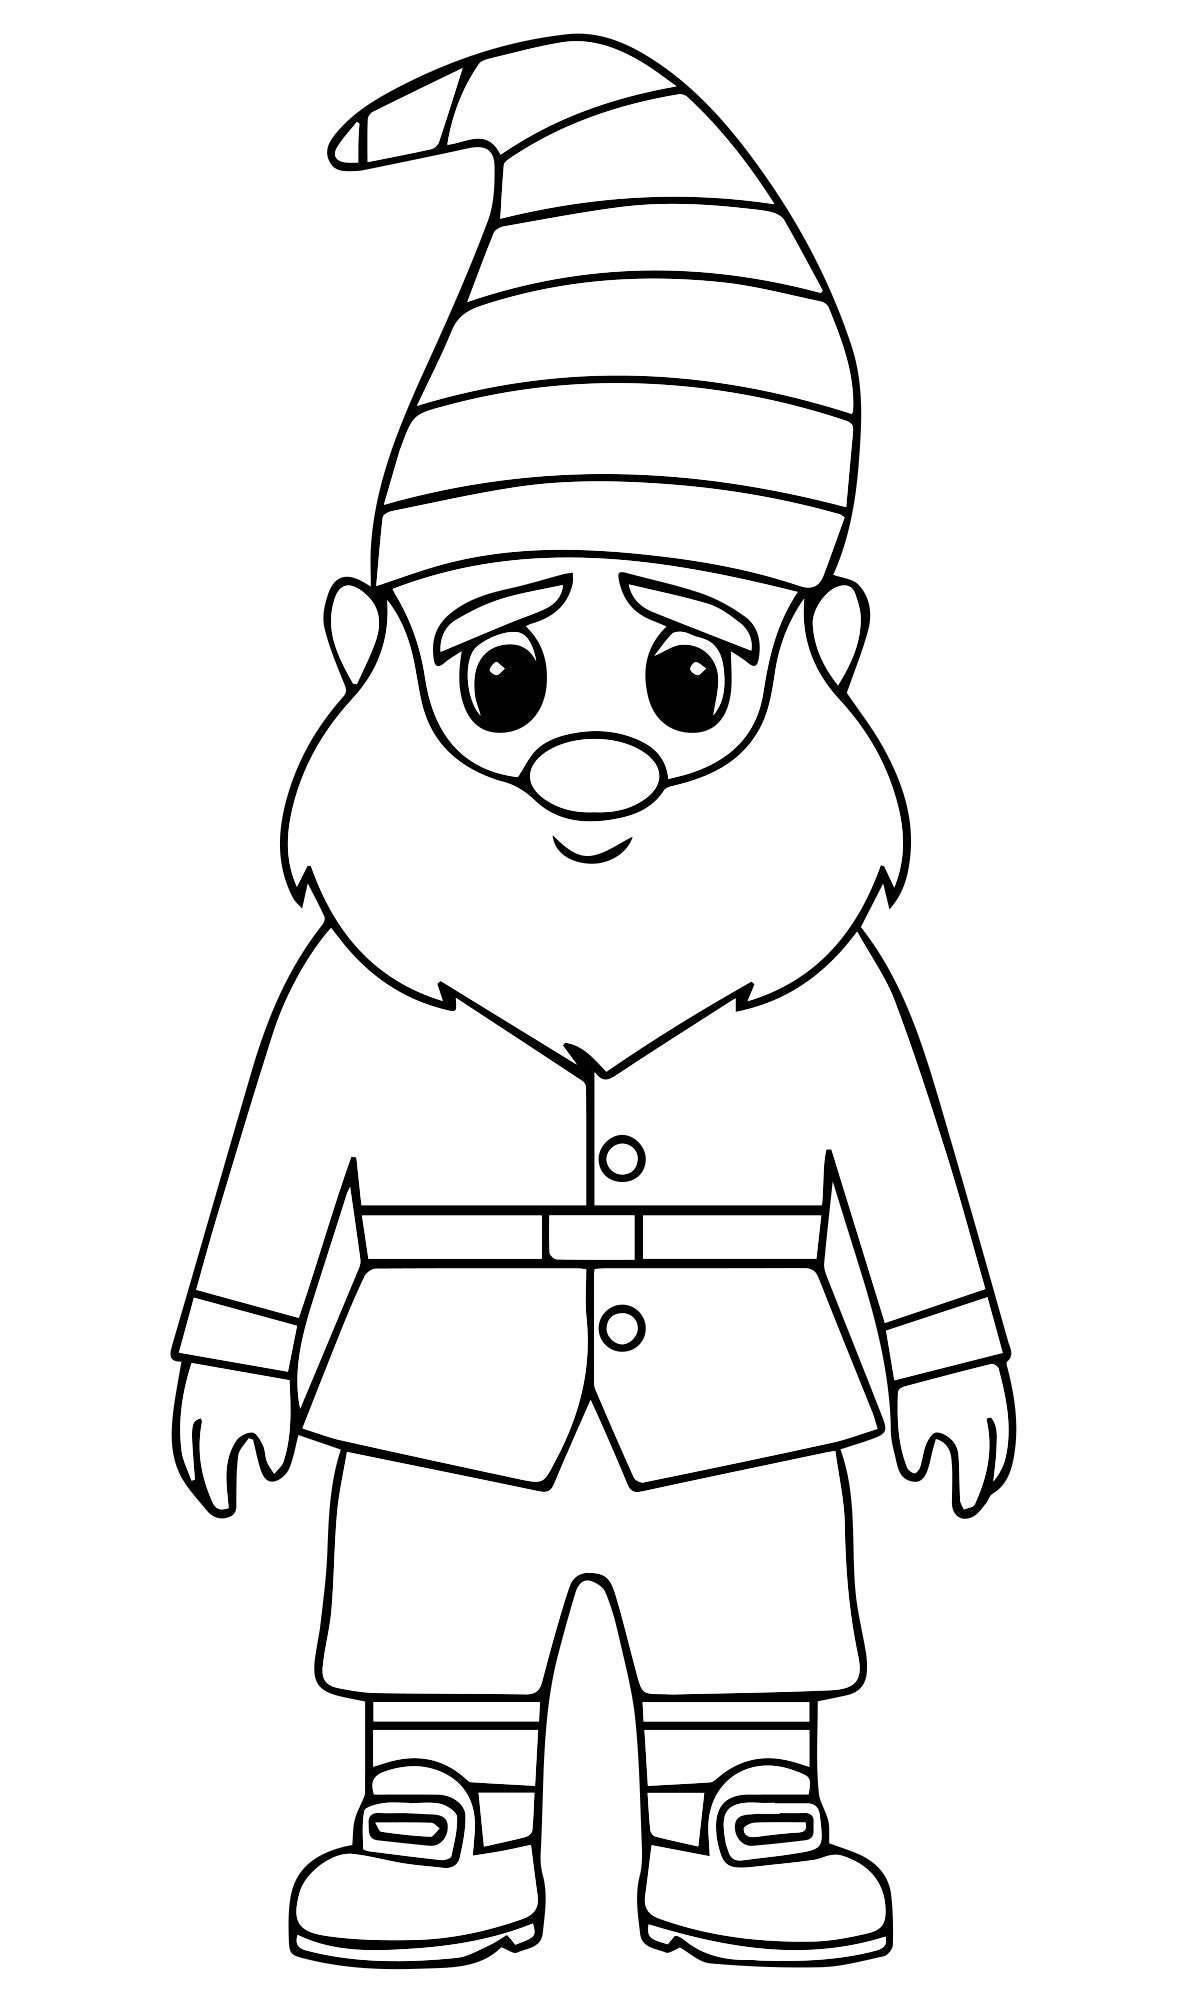 Colorful gnome coloring book for 3-4 year olds